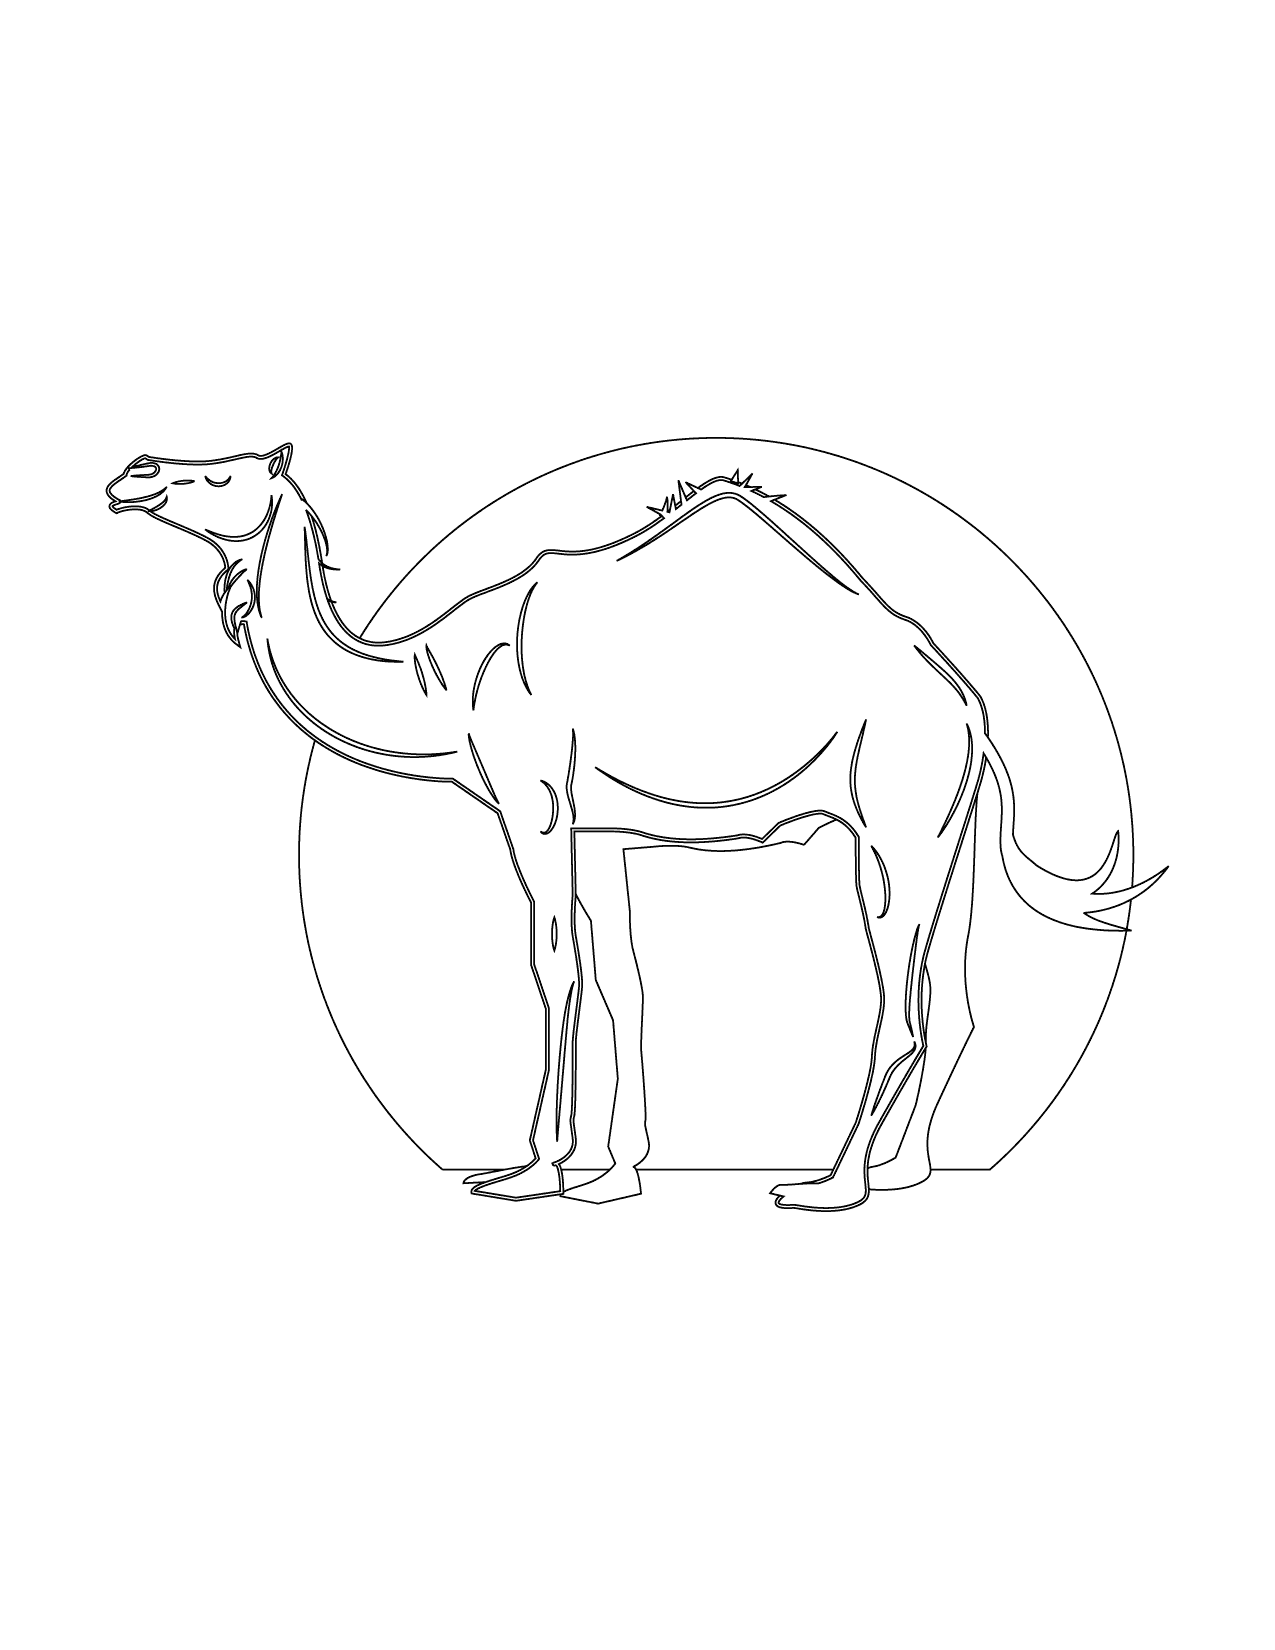 Camel At Sunset Coloring Page